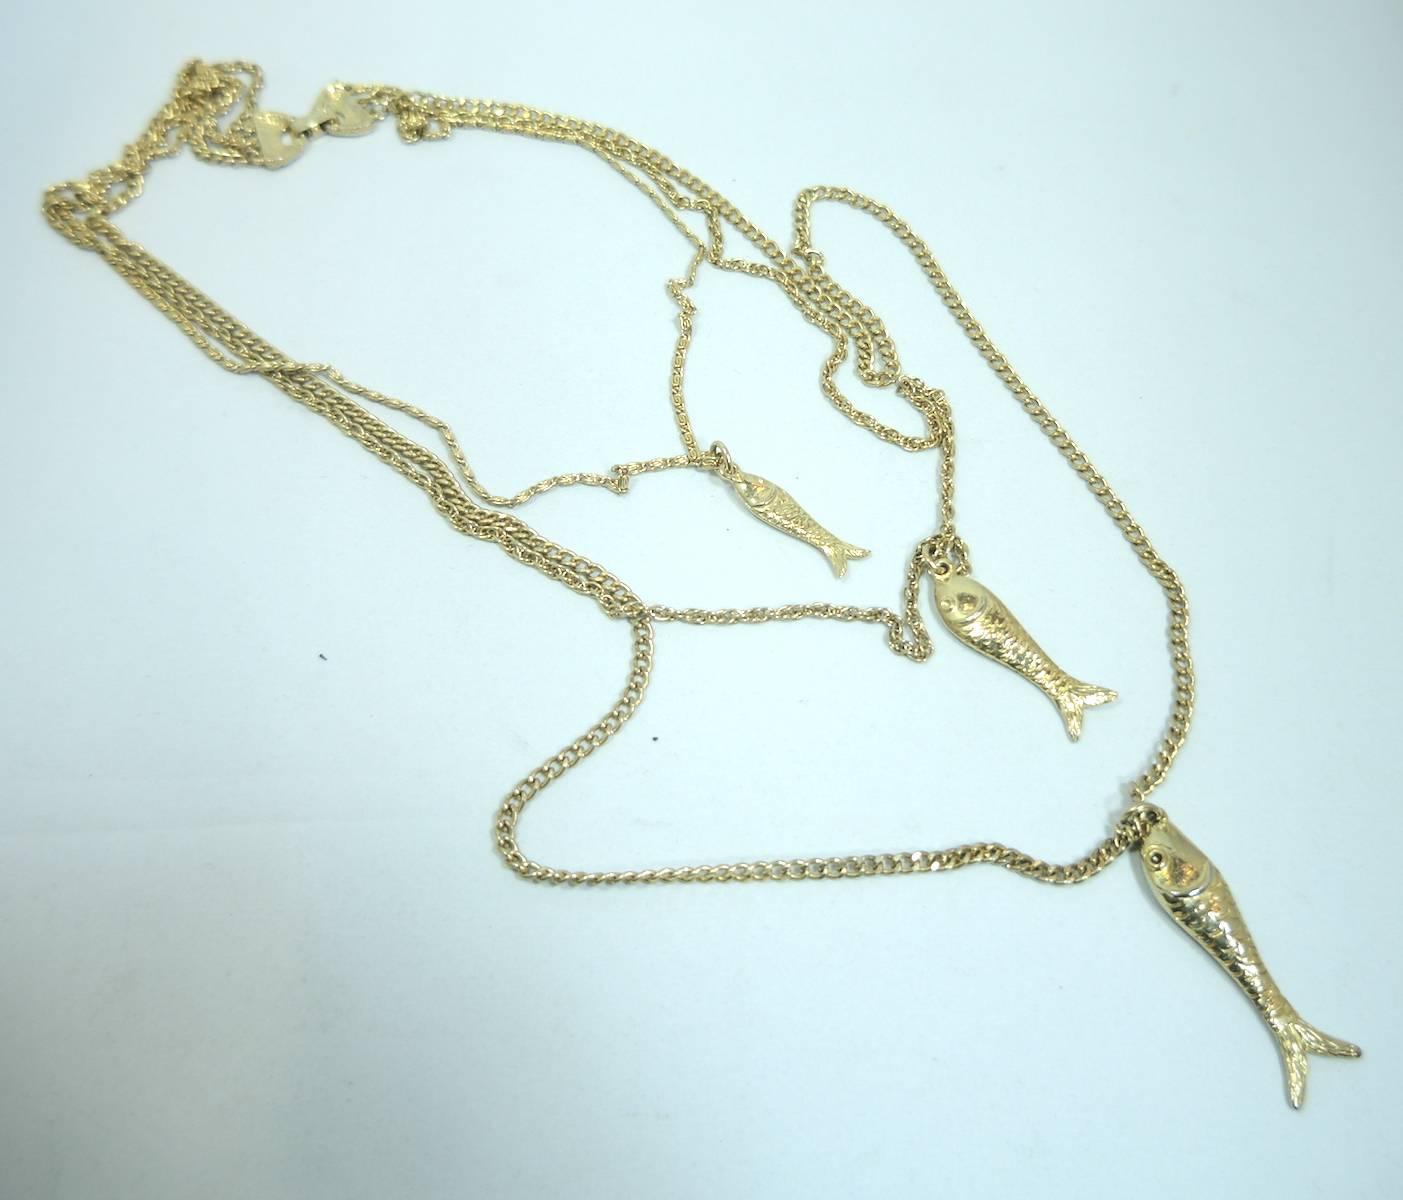 This is such an awesome necklace. Every chain has a fish pendant. The longest chain measures 36” and the shortest chain measures 24”. The pendants measure from the smallest 1-1/4” x 1/2” to the largest 2-1/4”. It is in a gold tone setting and is